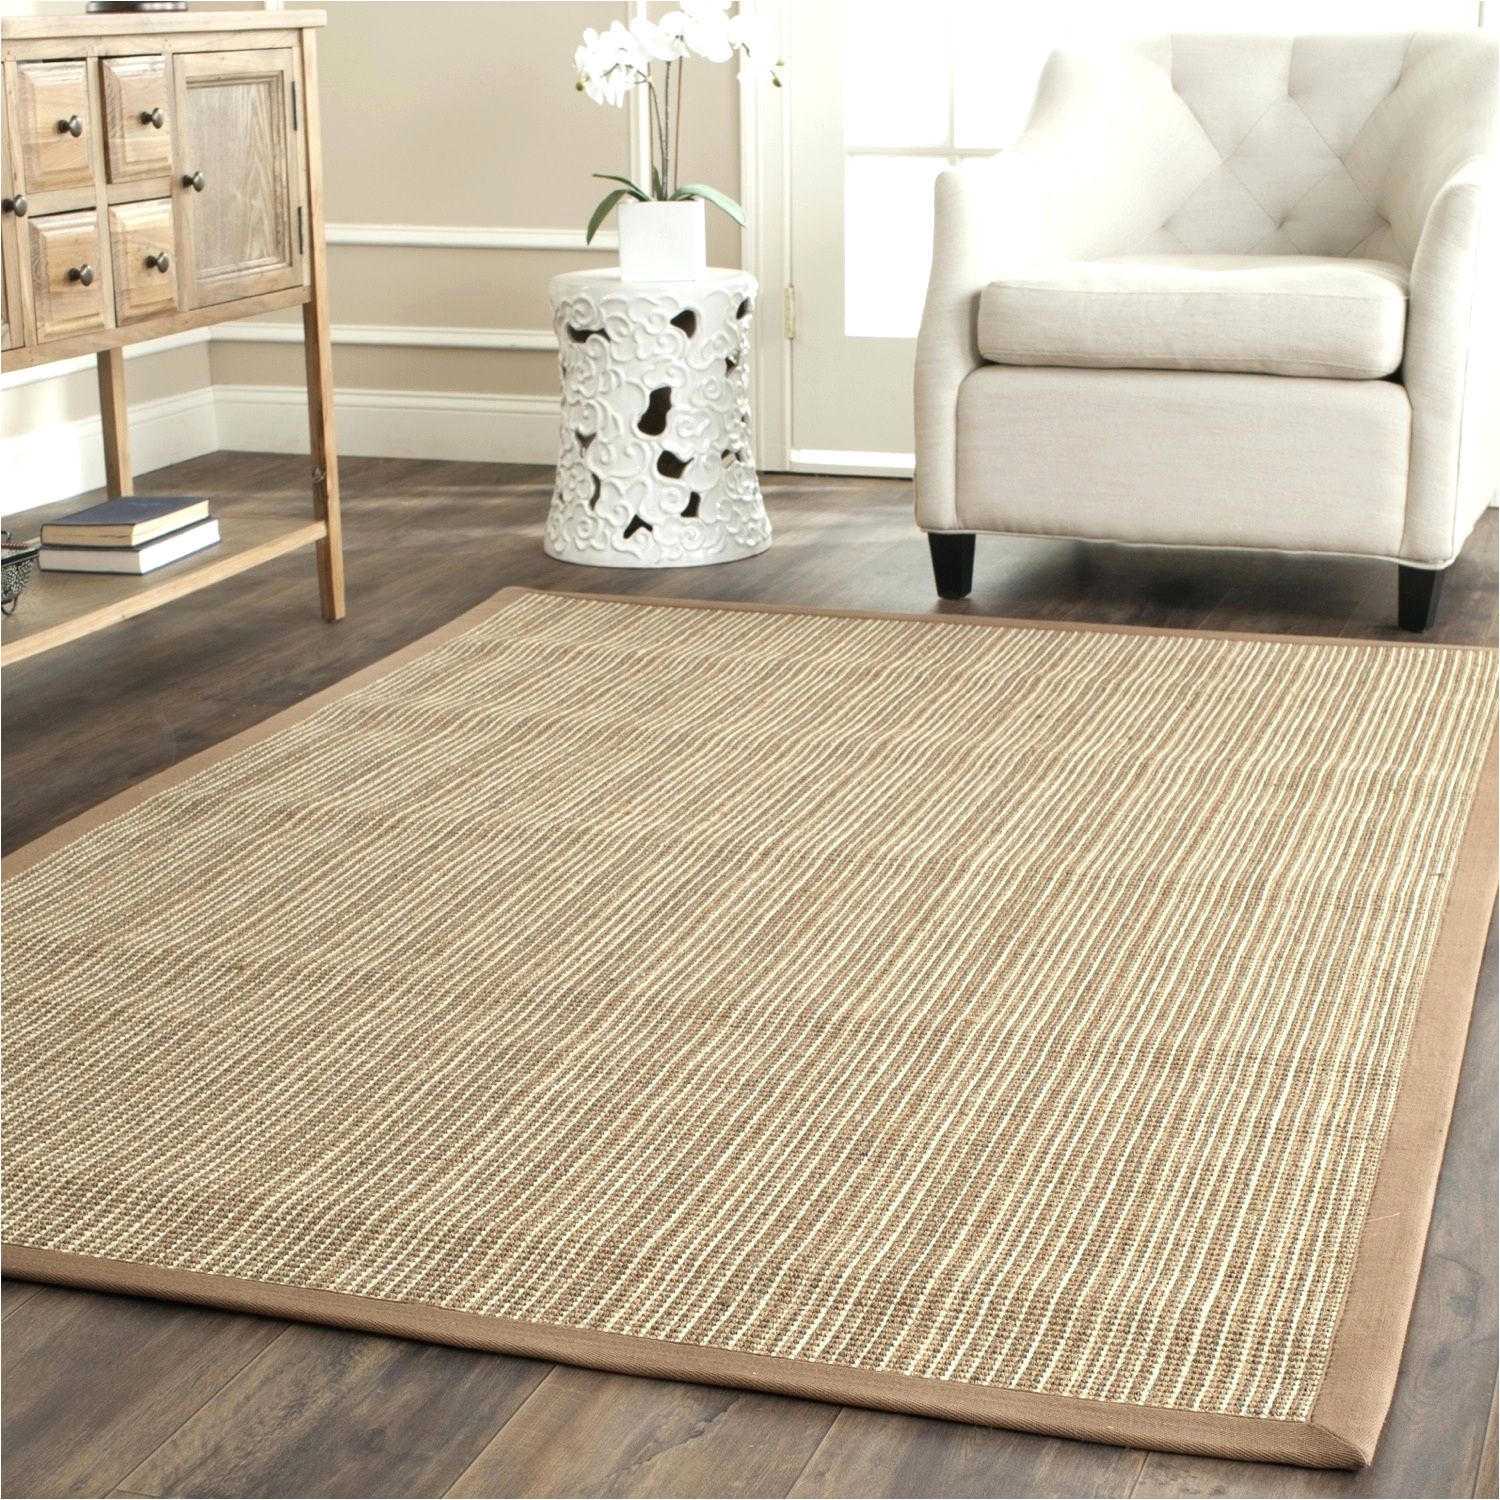 perfect carpet remnants home depot luxury outdoor sisal rugs dayri than inspirational carpet remnants home depot